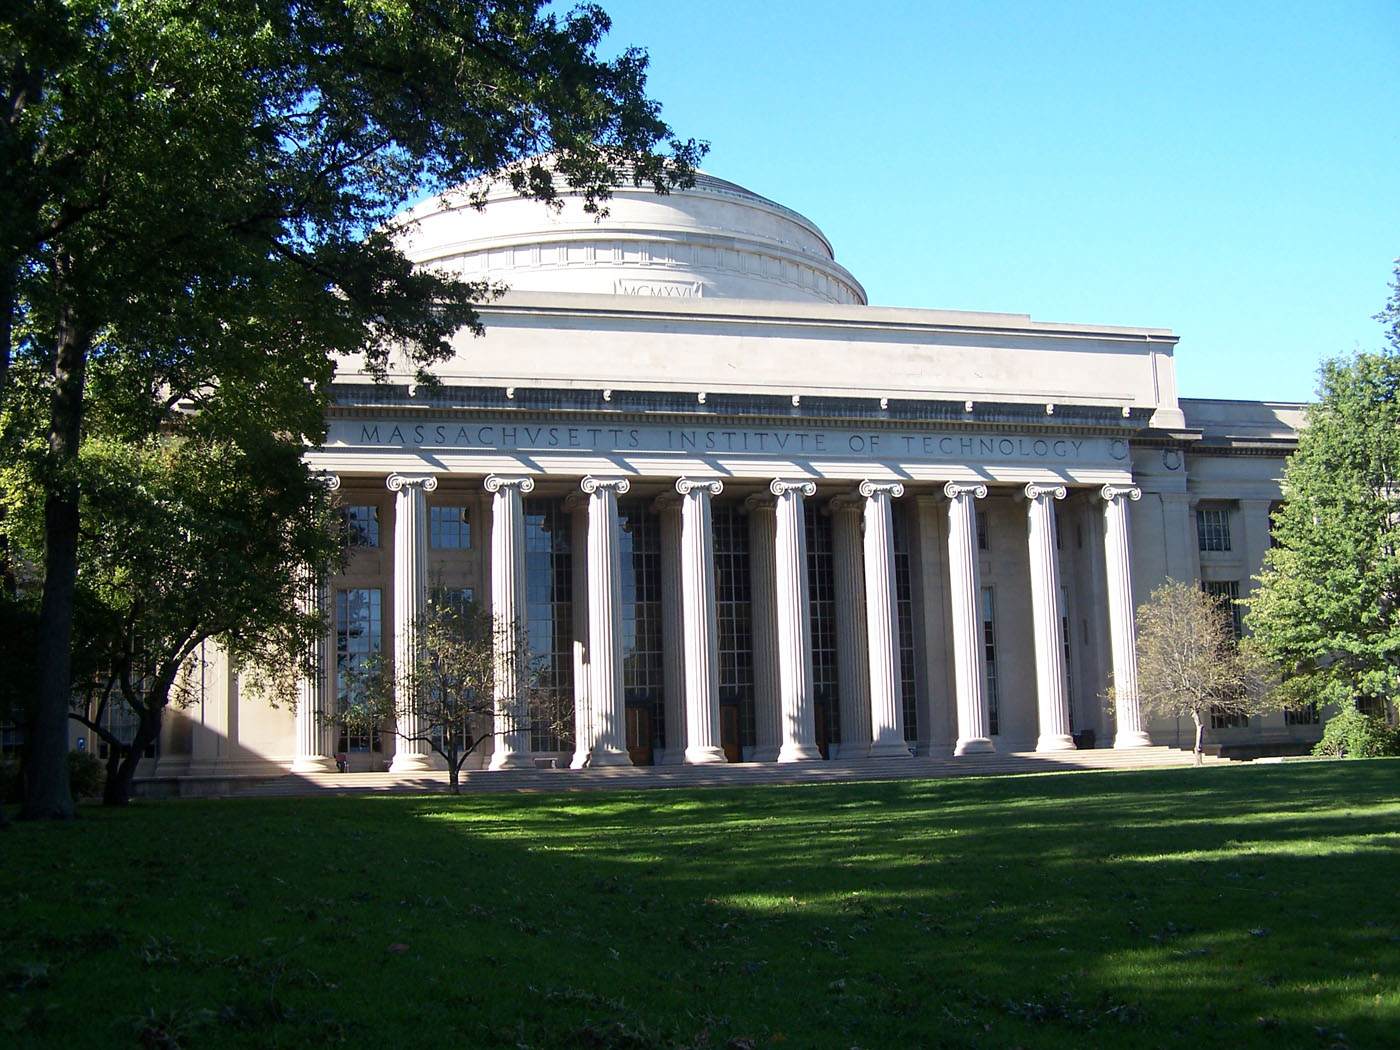 MIT's D-Lab: Promoting Sustainable Development through Technology and Education